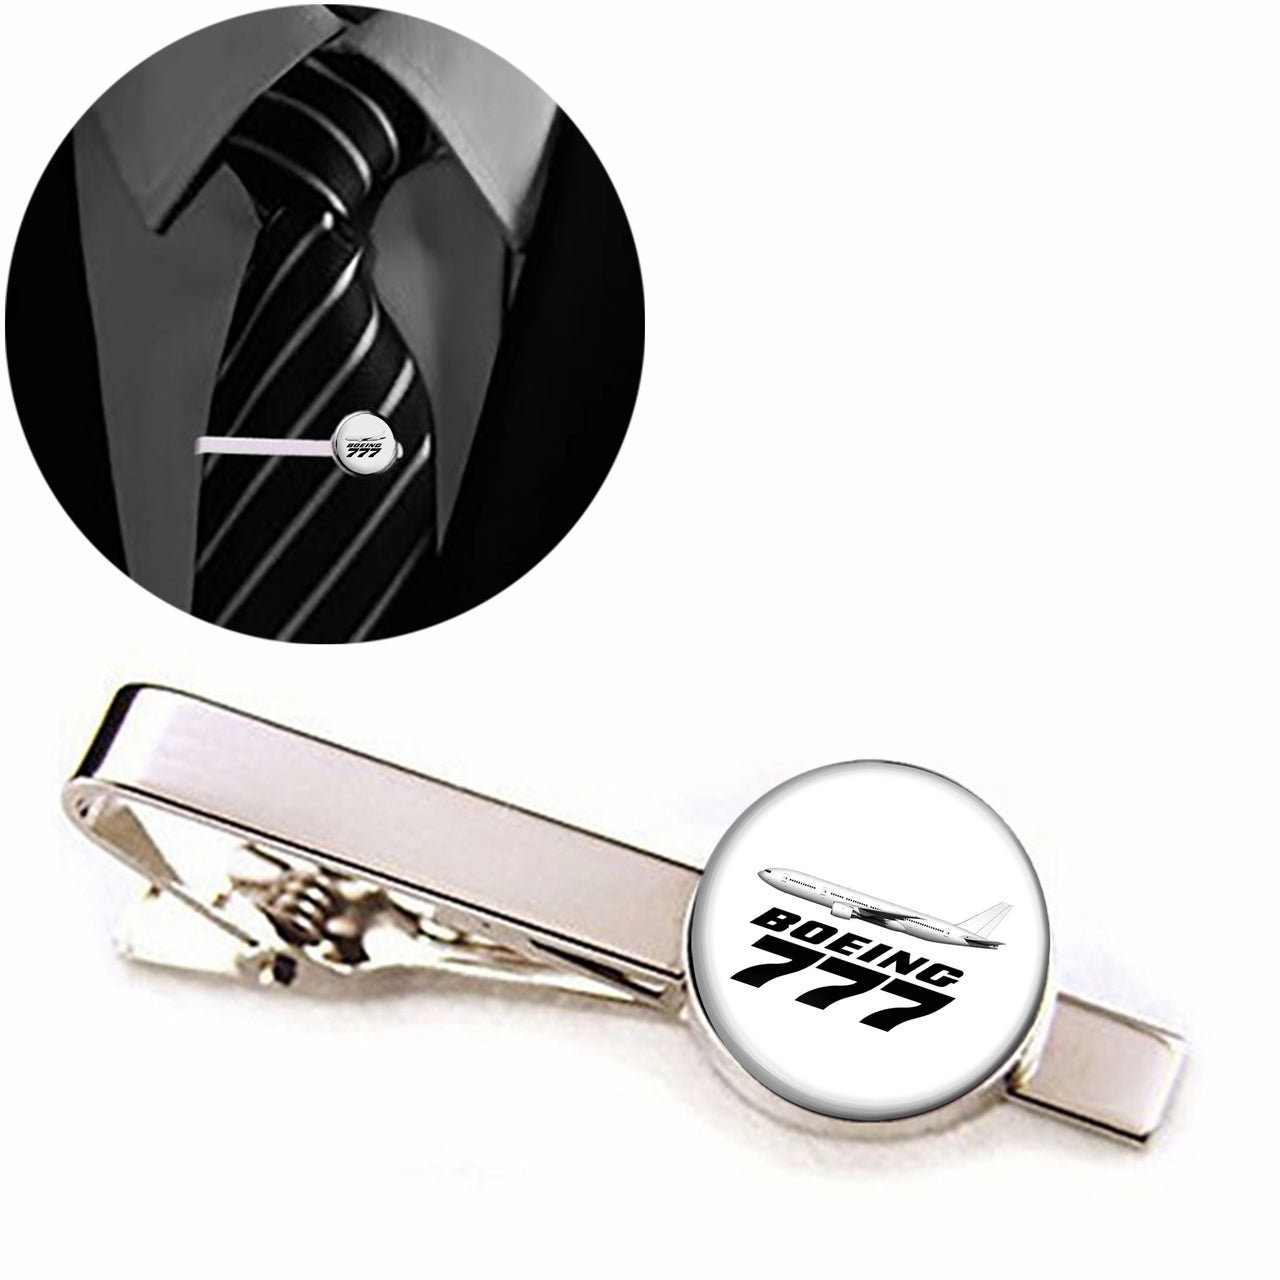 The Boeing 777 Designed Tie Clips